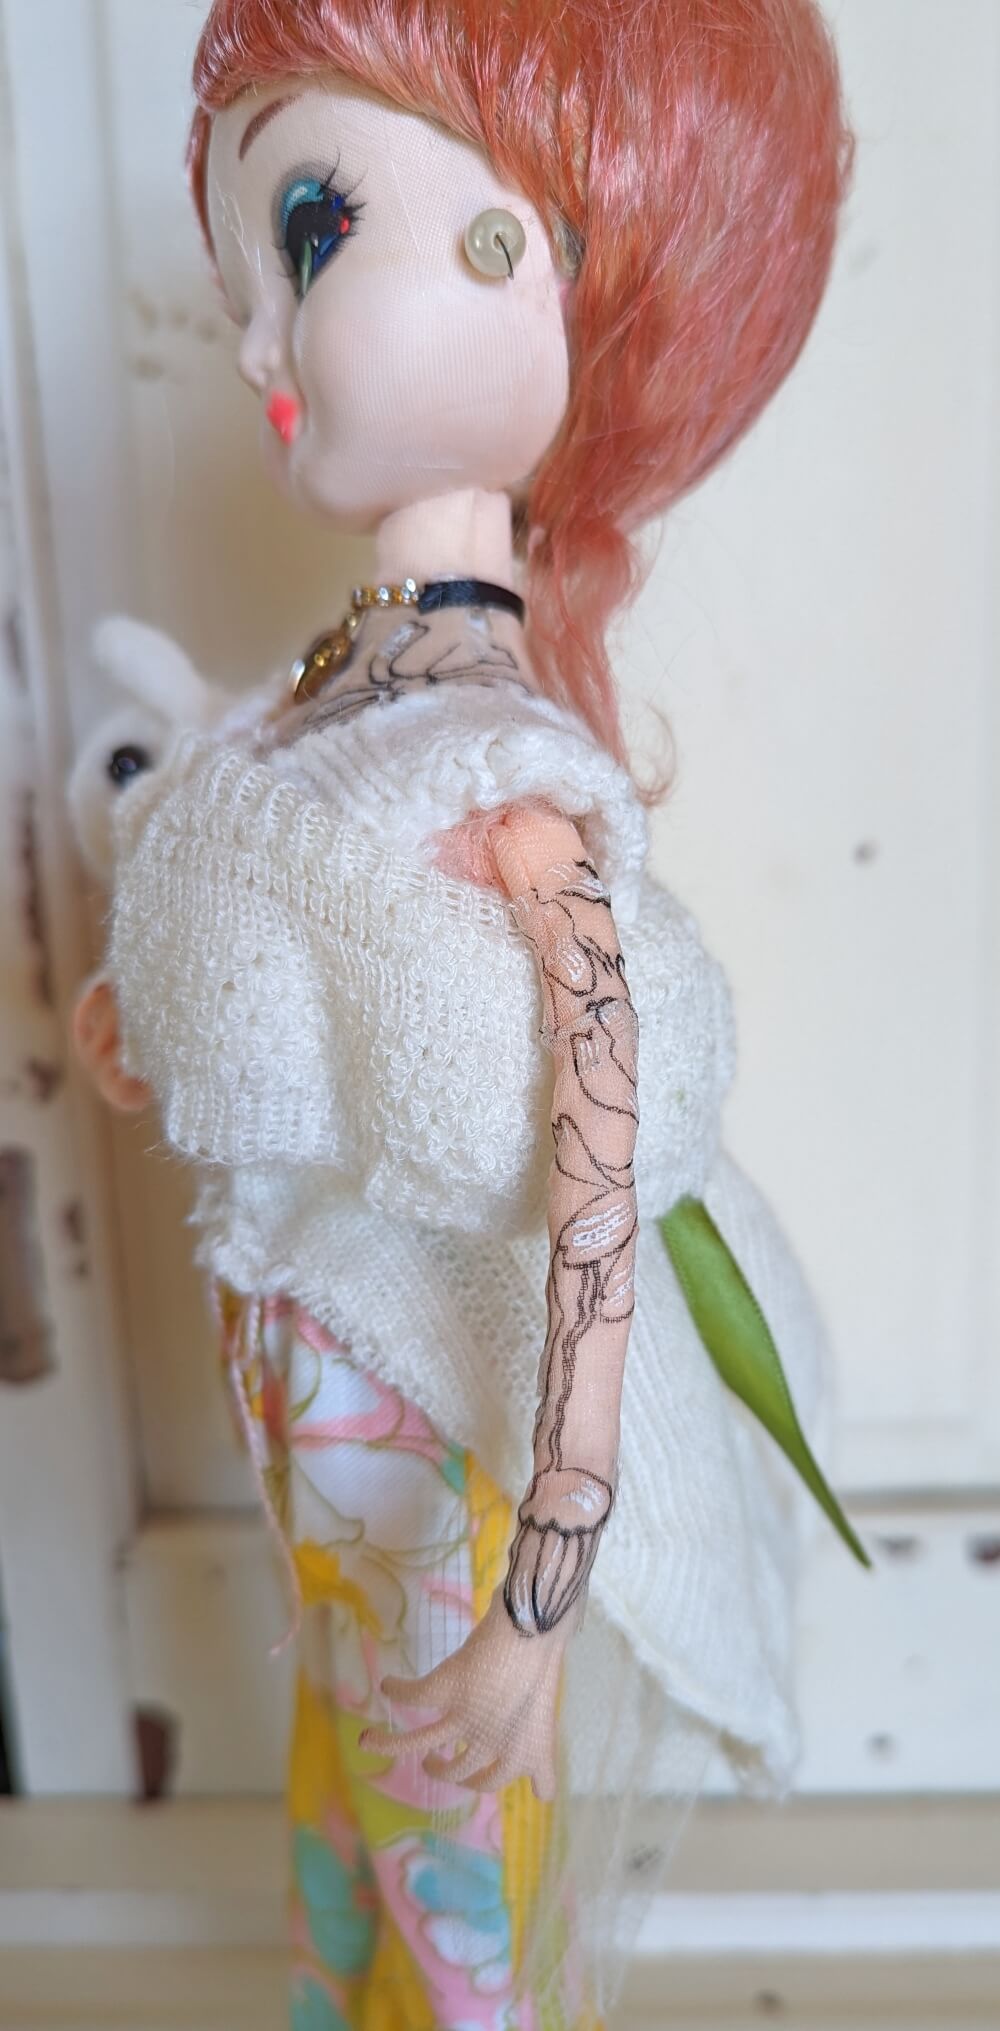 Upcycled Bradley Doll with Pink Dyed Hair